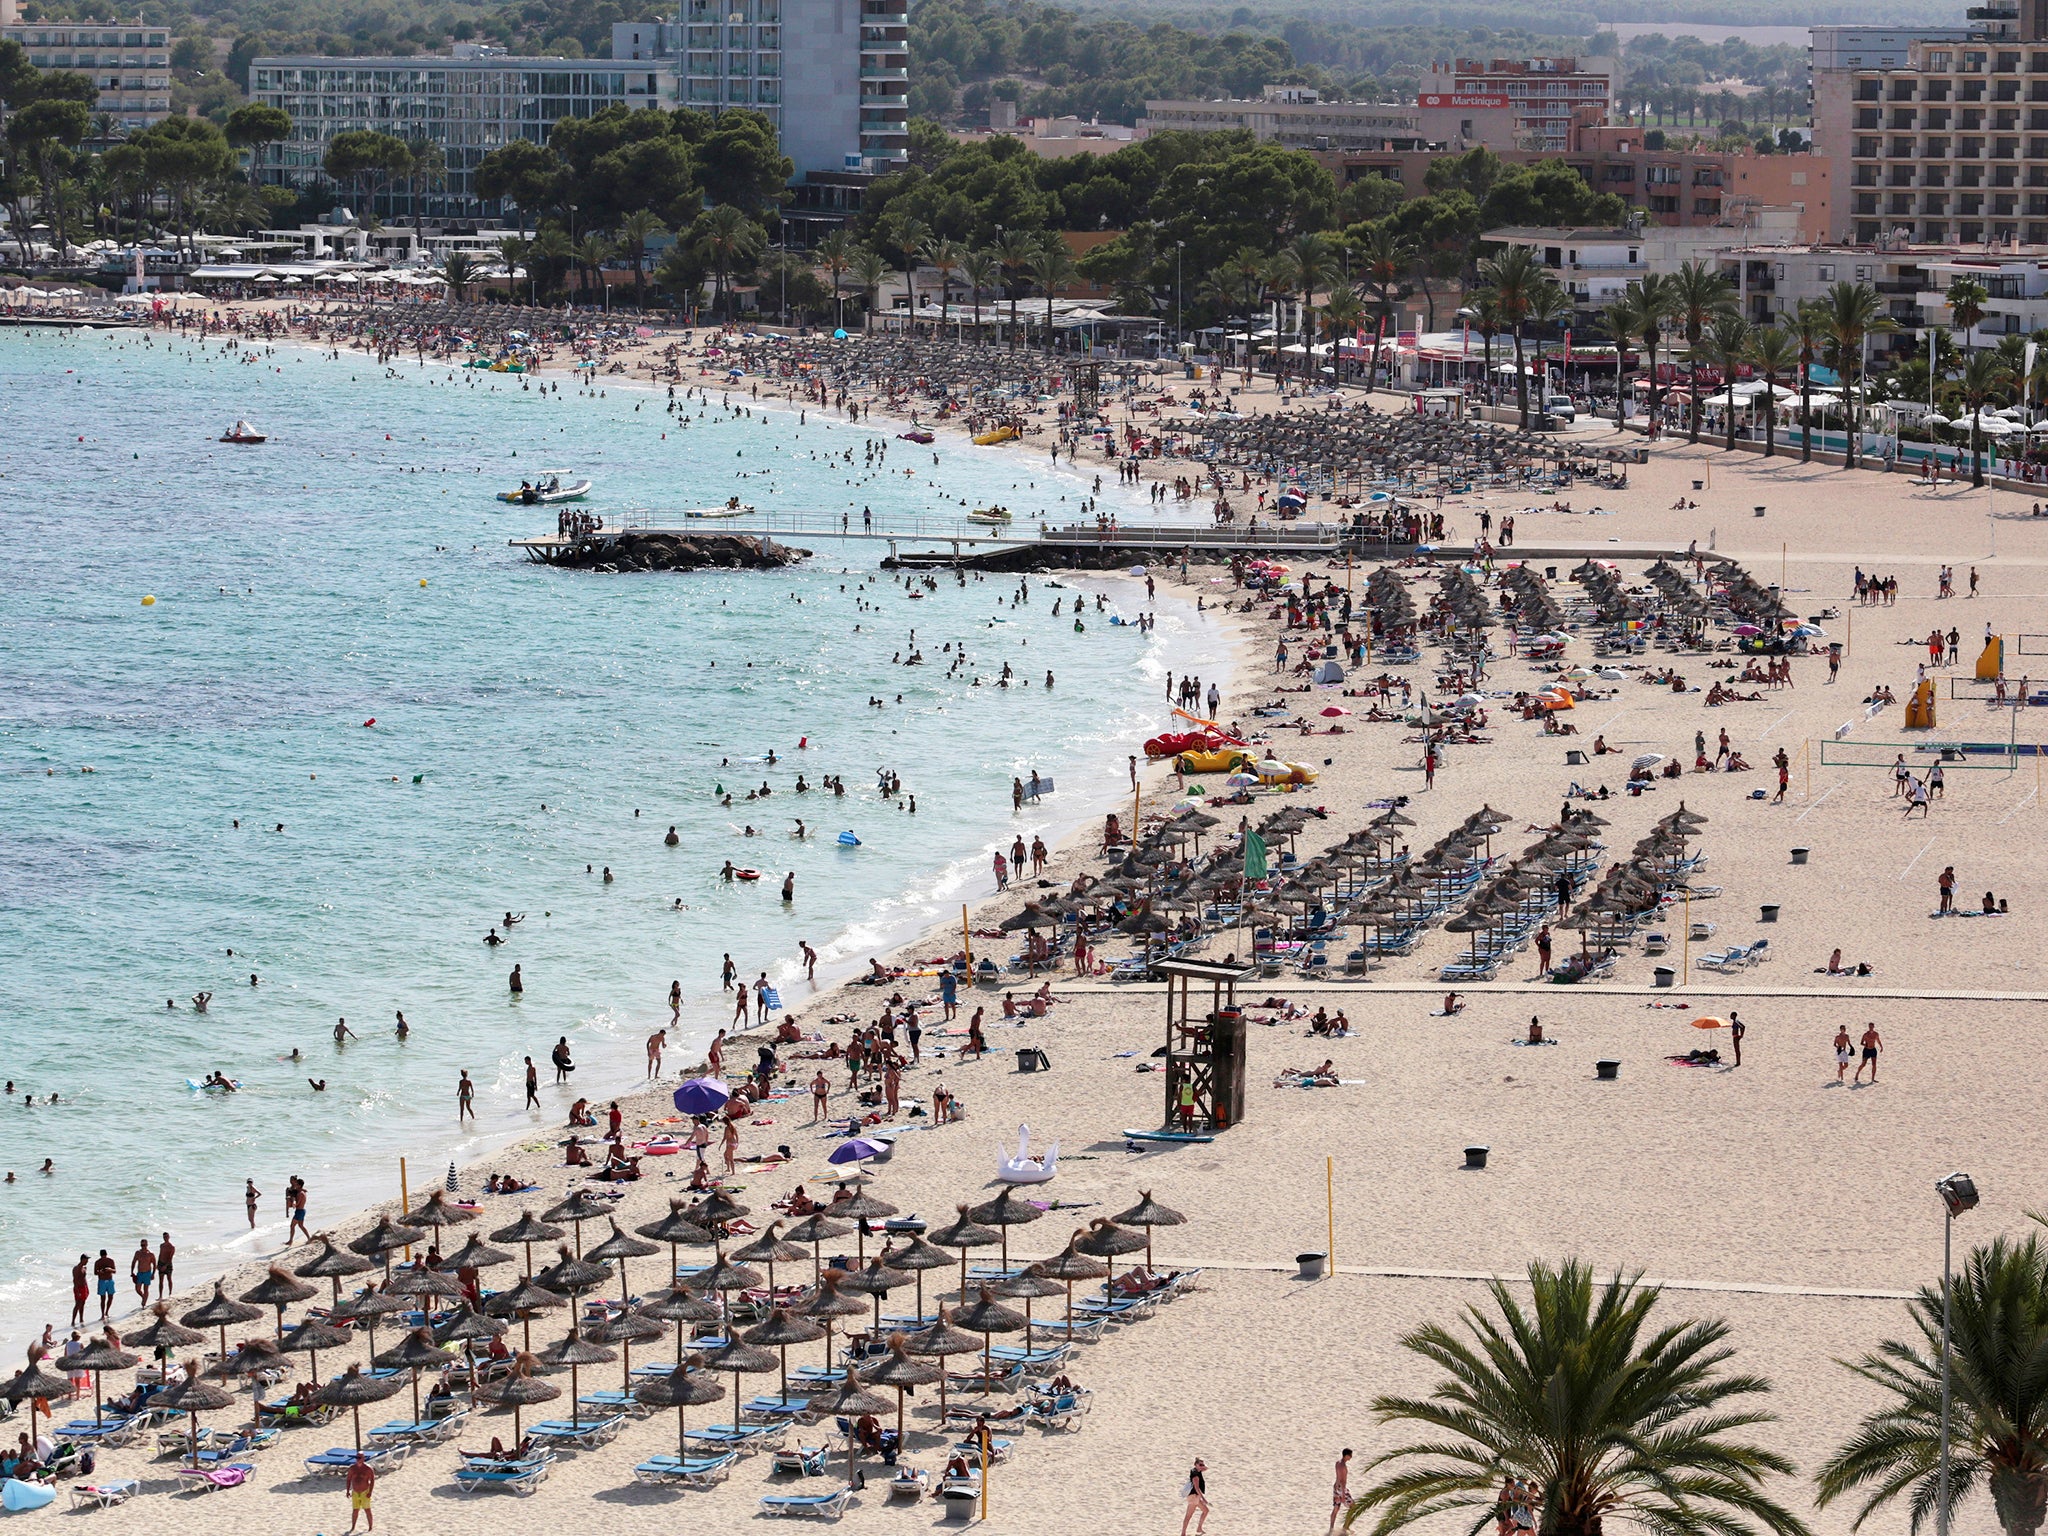 Magaluf is known as a popular resort on the Spanish island of Majorca